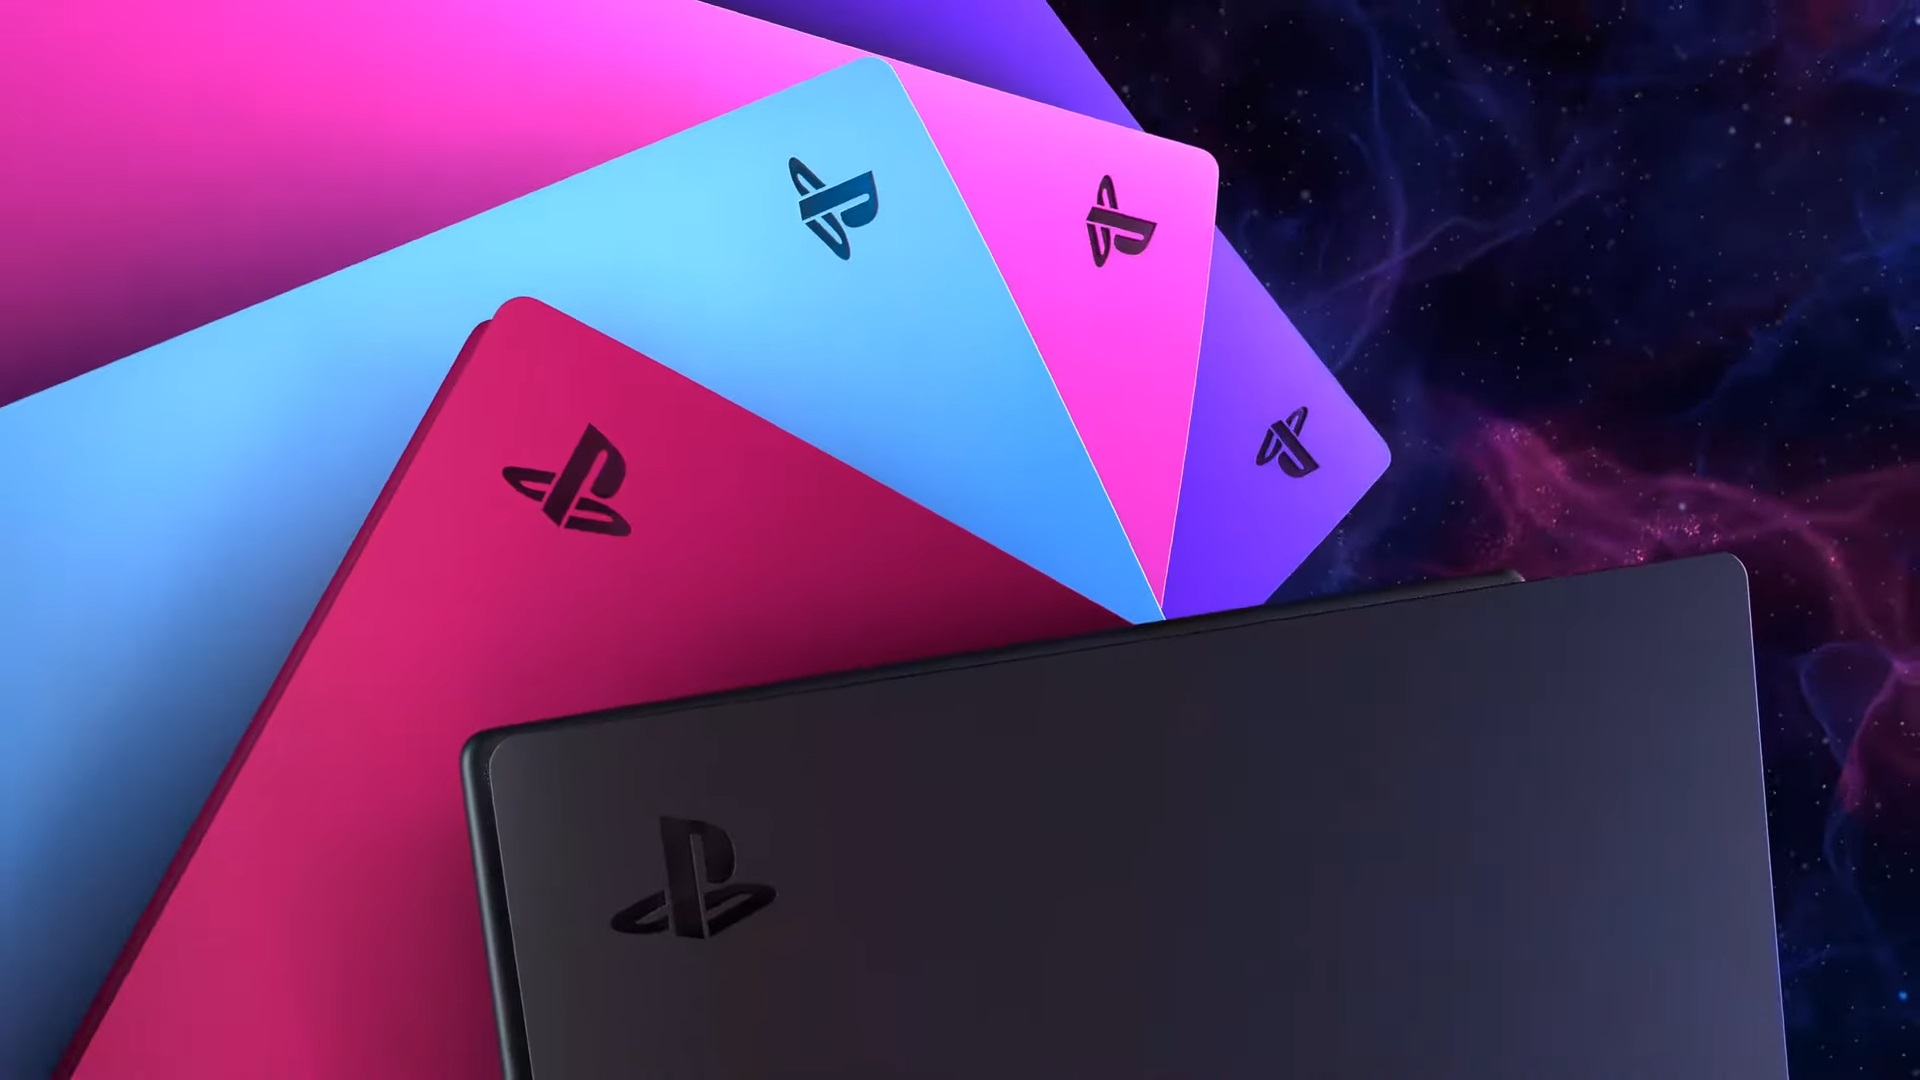 Report: The PS5 Pro Is In Development, Has A Release Window